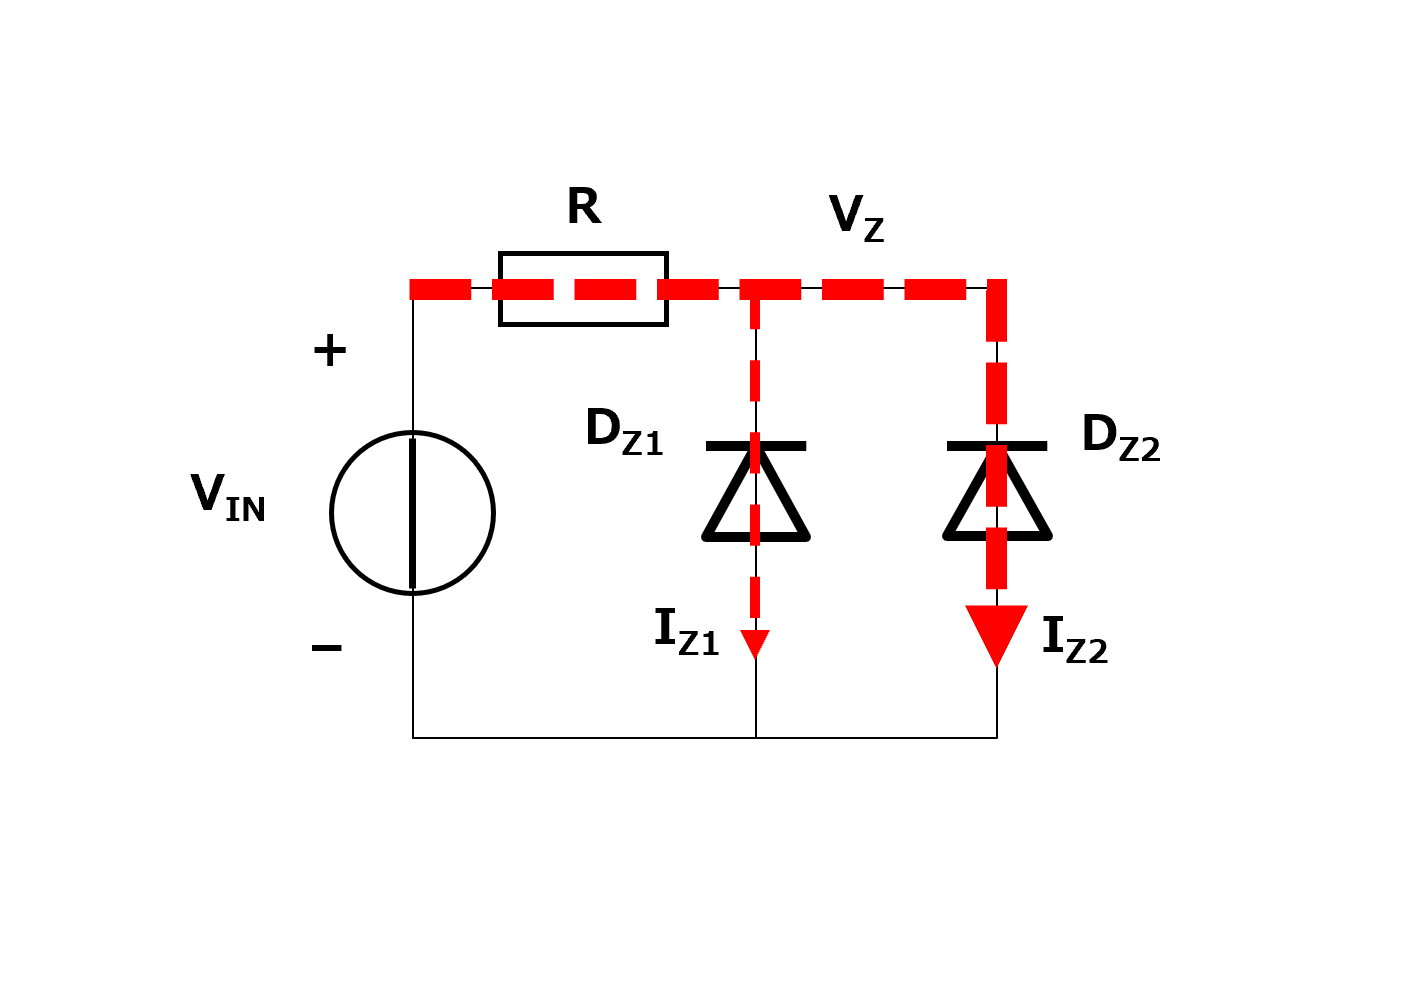 Fig. 1 Zener diode parallel circuit (not recommended)